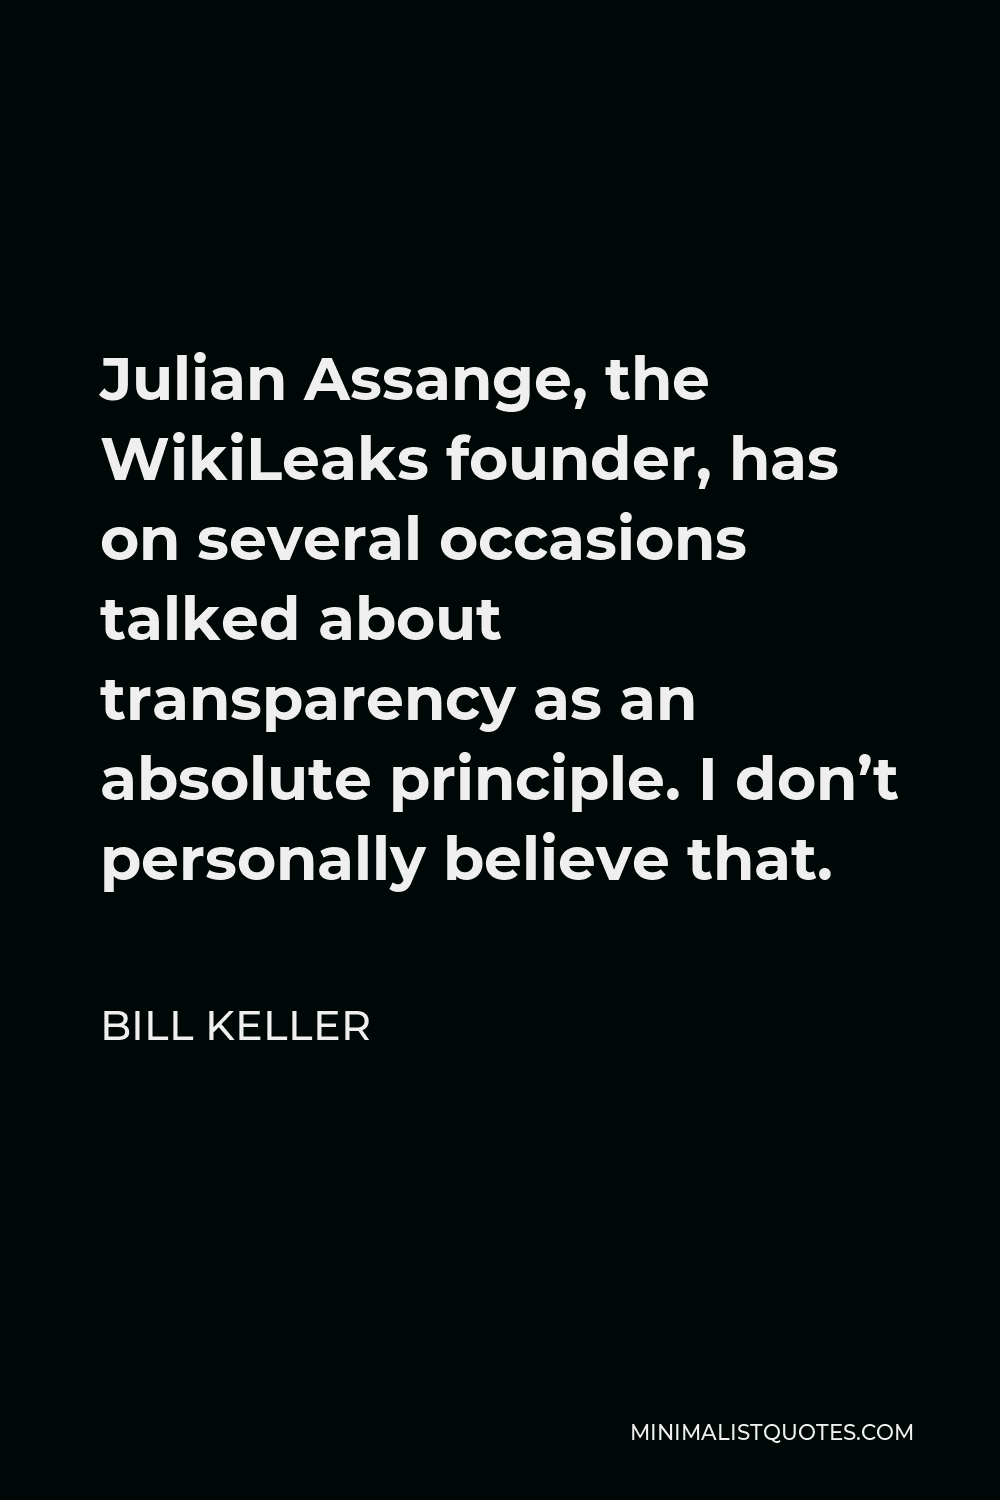 Bill Keller Quote - Julian Assange, the WikiLeaks founder, has on several occasions talked about transparency as an absolute principle. I don’t personally believe that.